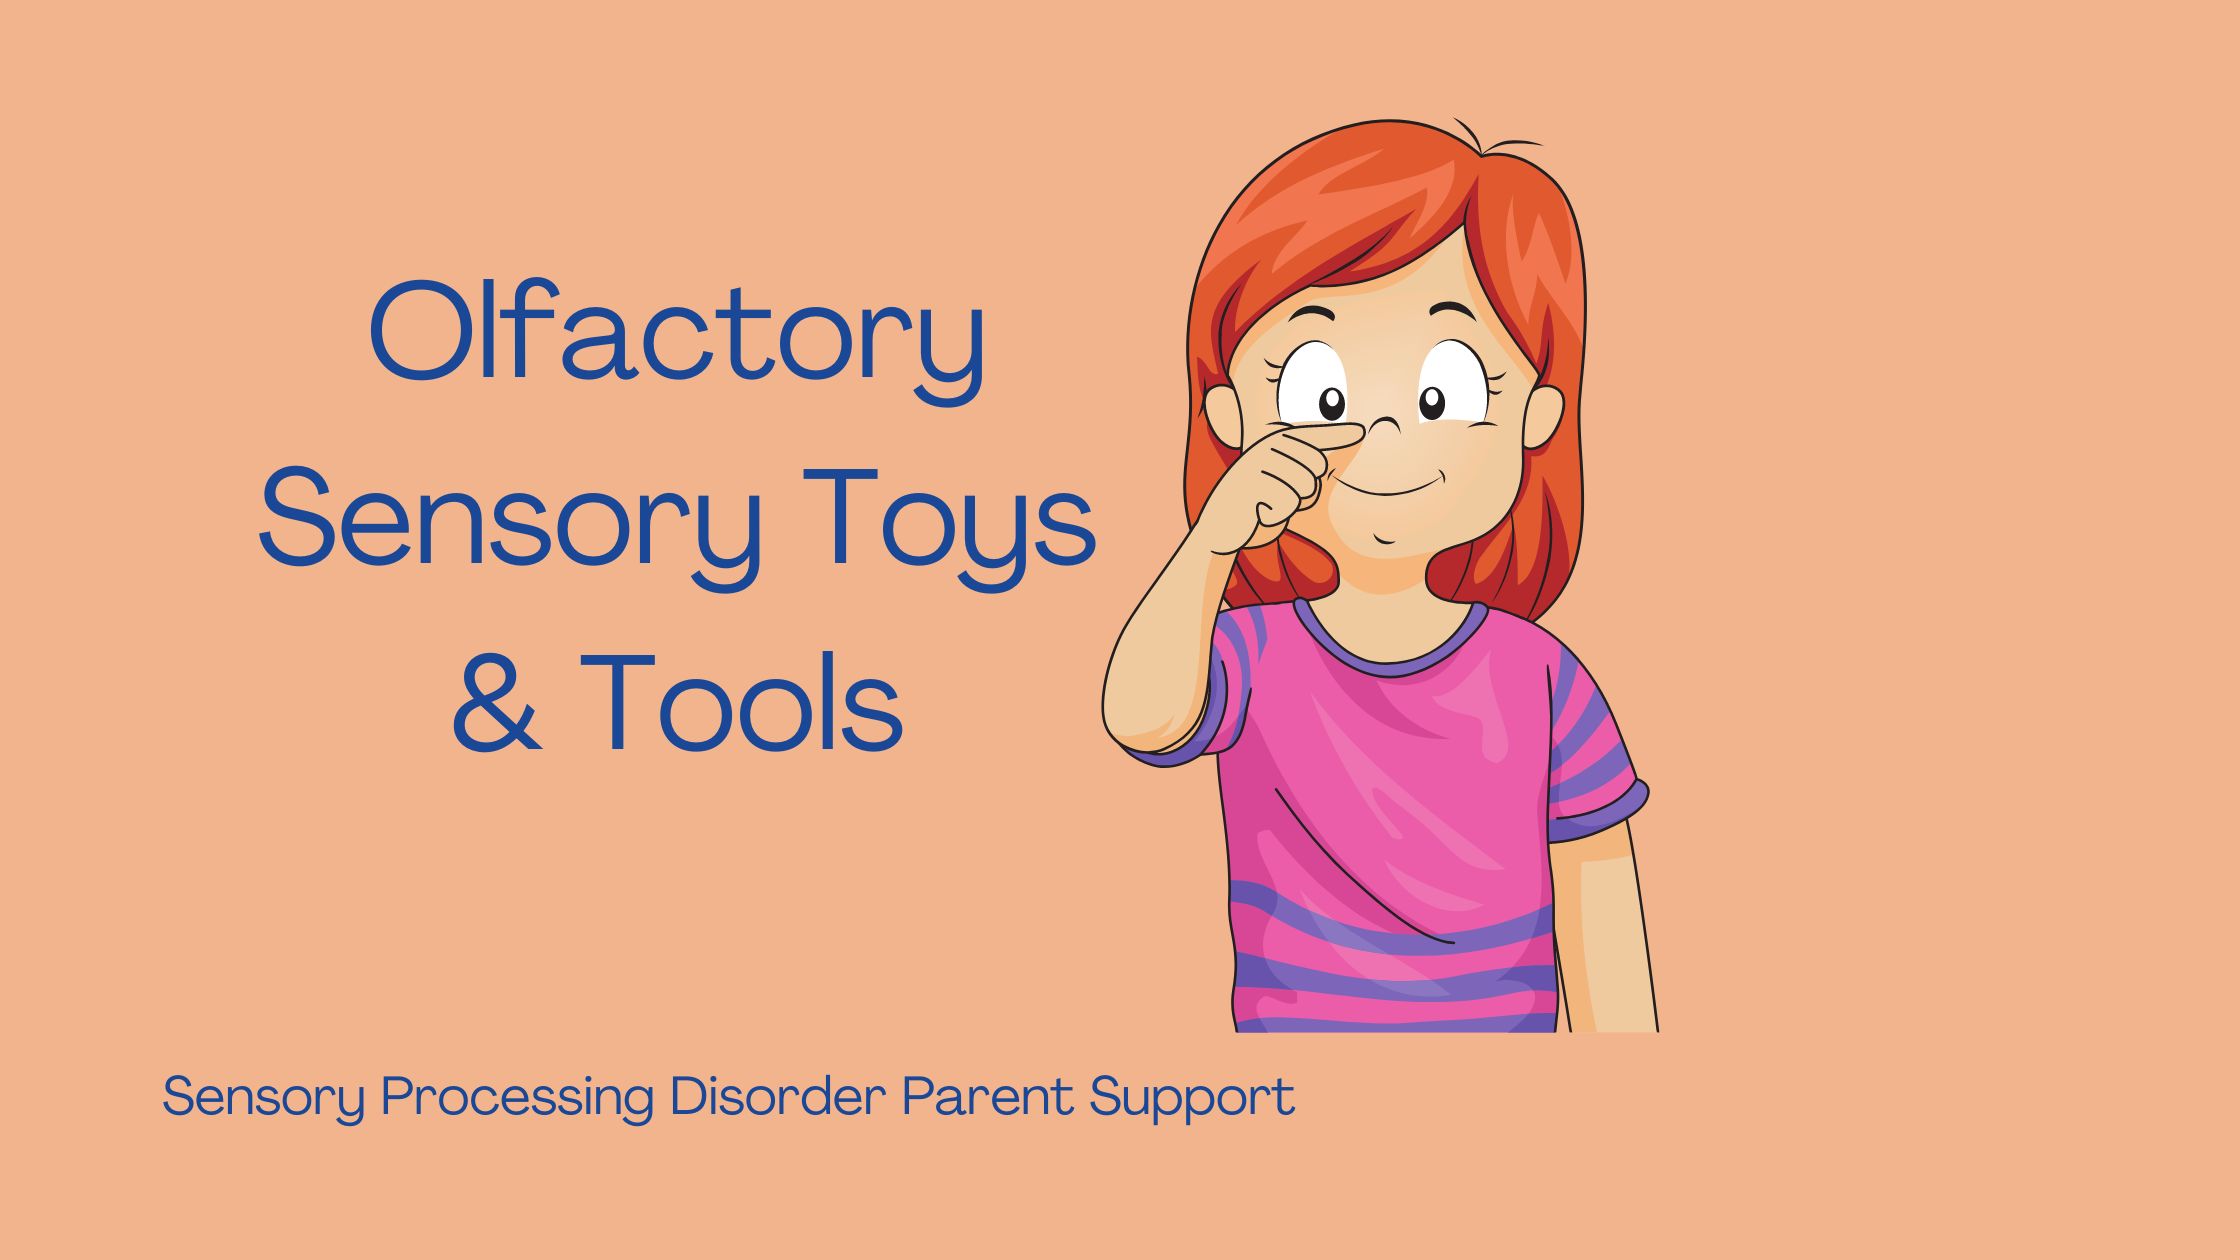 child with sensory processing disorder smelling using olfactory sense Olfactory Sensory Toys & Tools for Sensory Processing Disorder